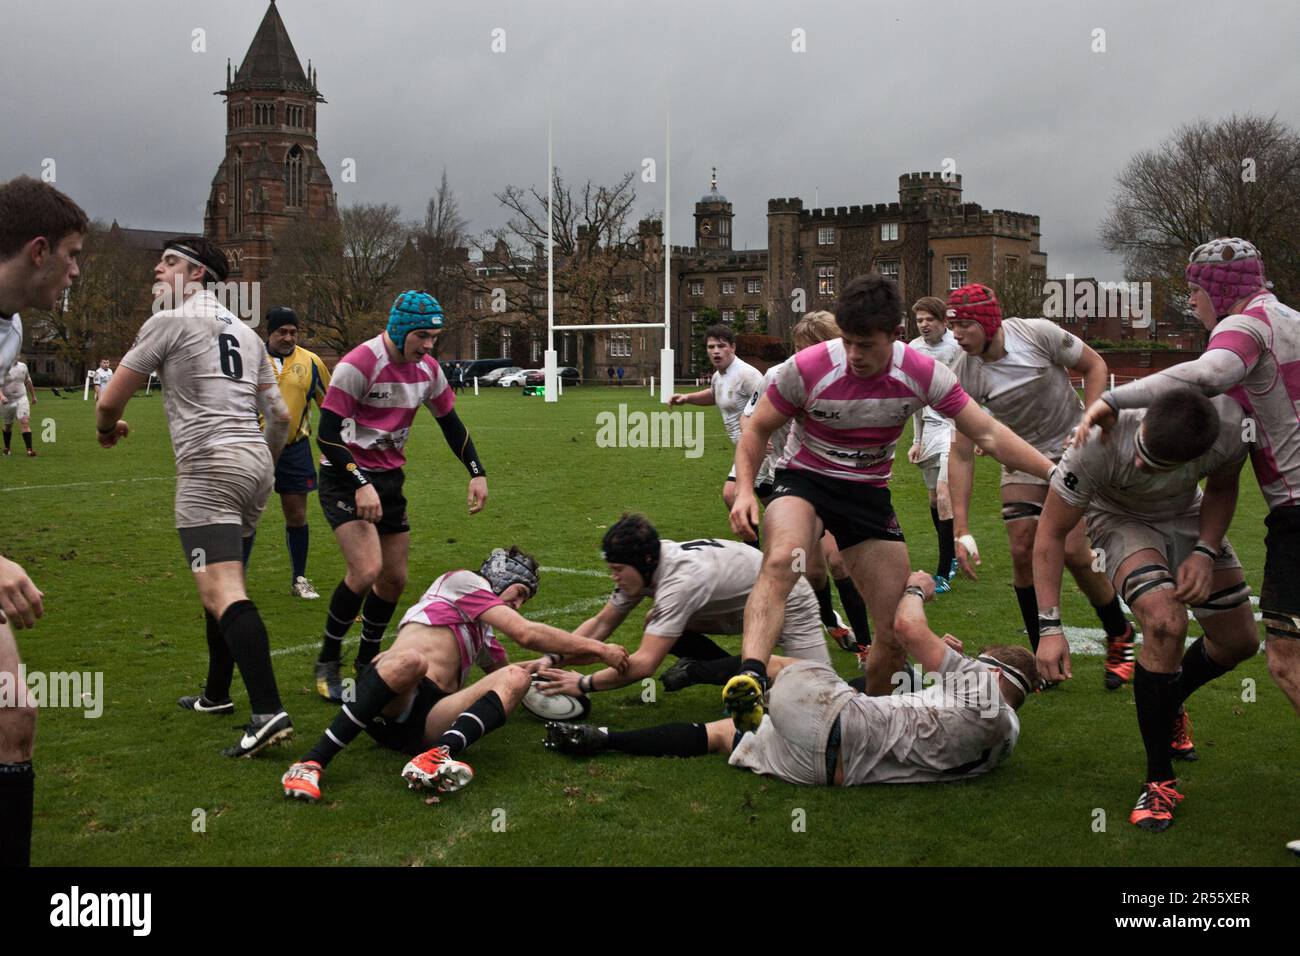 A rugby match played at 'the Close', at Rugby school, the same rugby pitch where that sport was allegedly invented by William Webb Ellis in 1823. Stock Photo